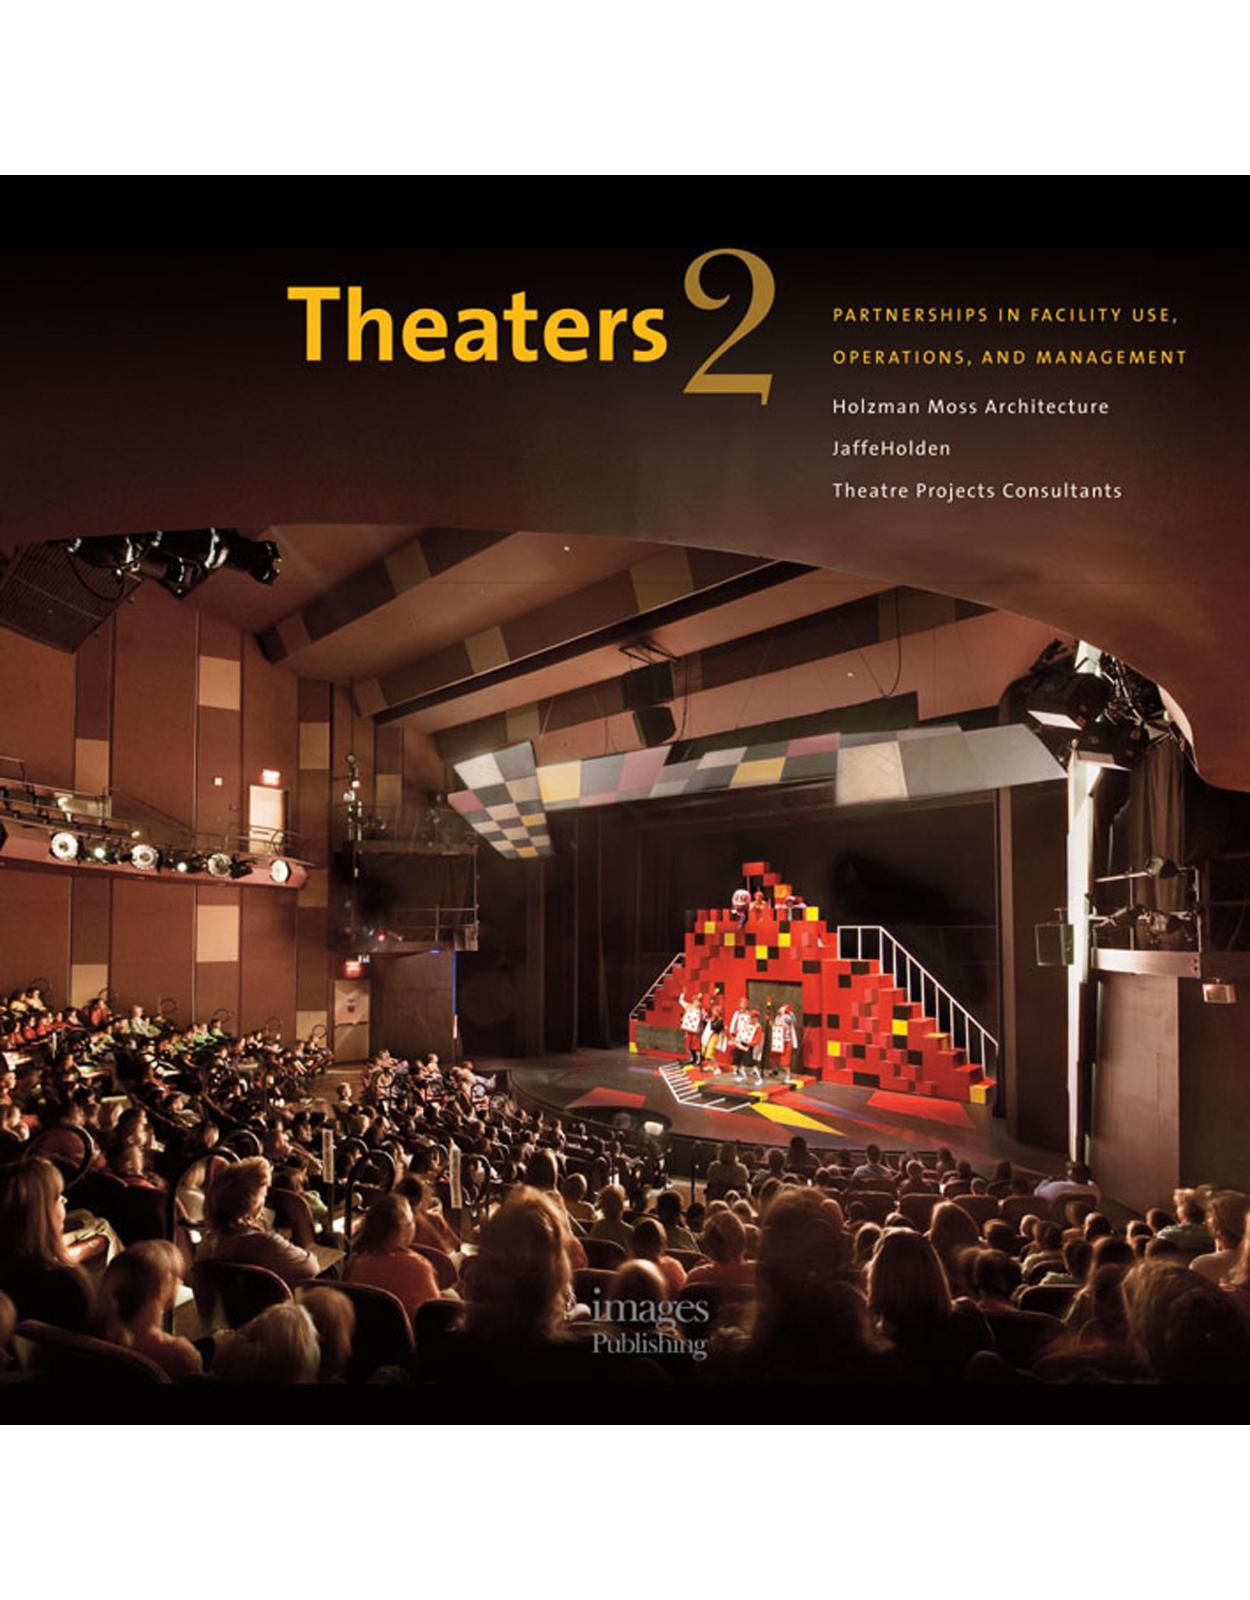 Theaters 2: Partnerships in Facility Use, Operations, and Management